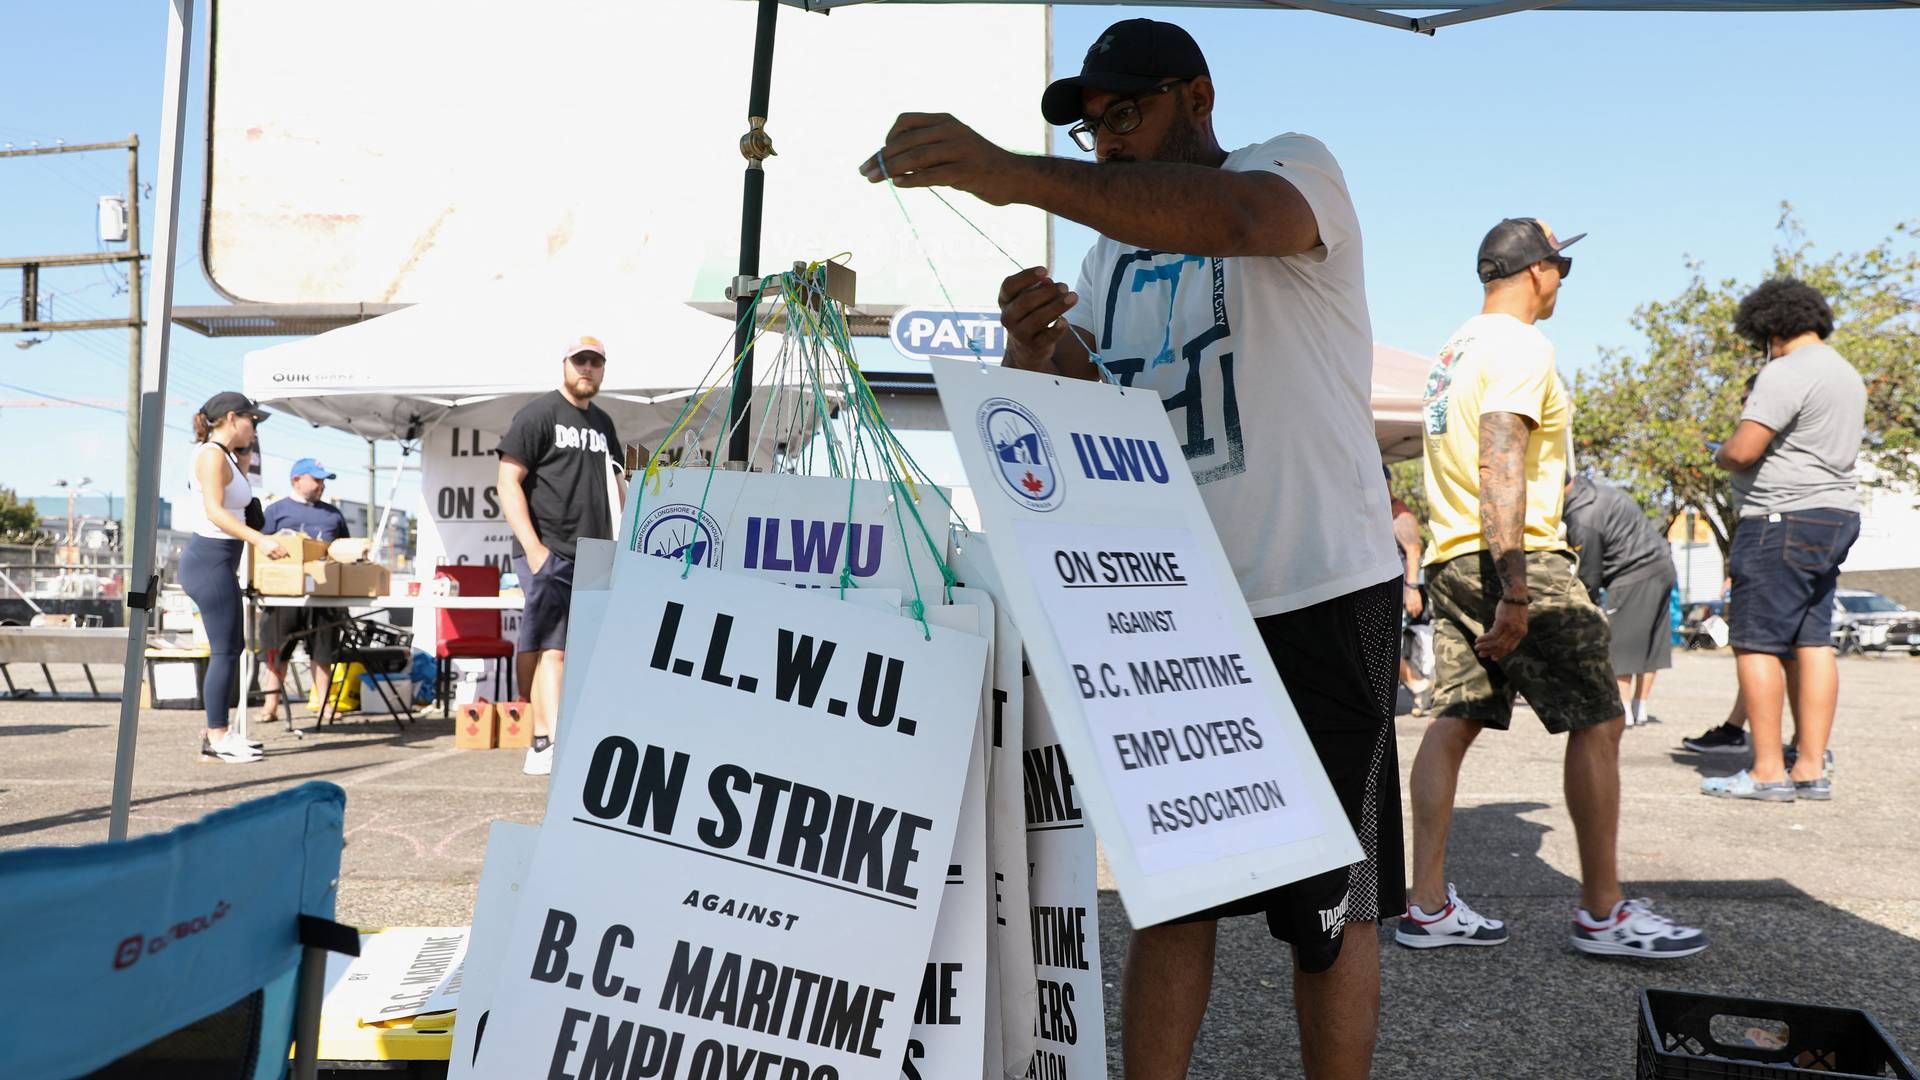 A preliminary four-year agreement has been reached between the union ILWU and the employers' association BCMEA after months of negotiations. | Photo: Chris Helgren/Reuters/Ritzau Scanpix